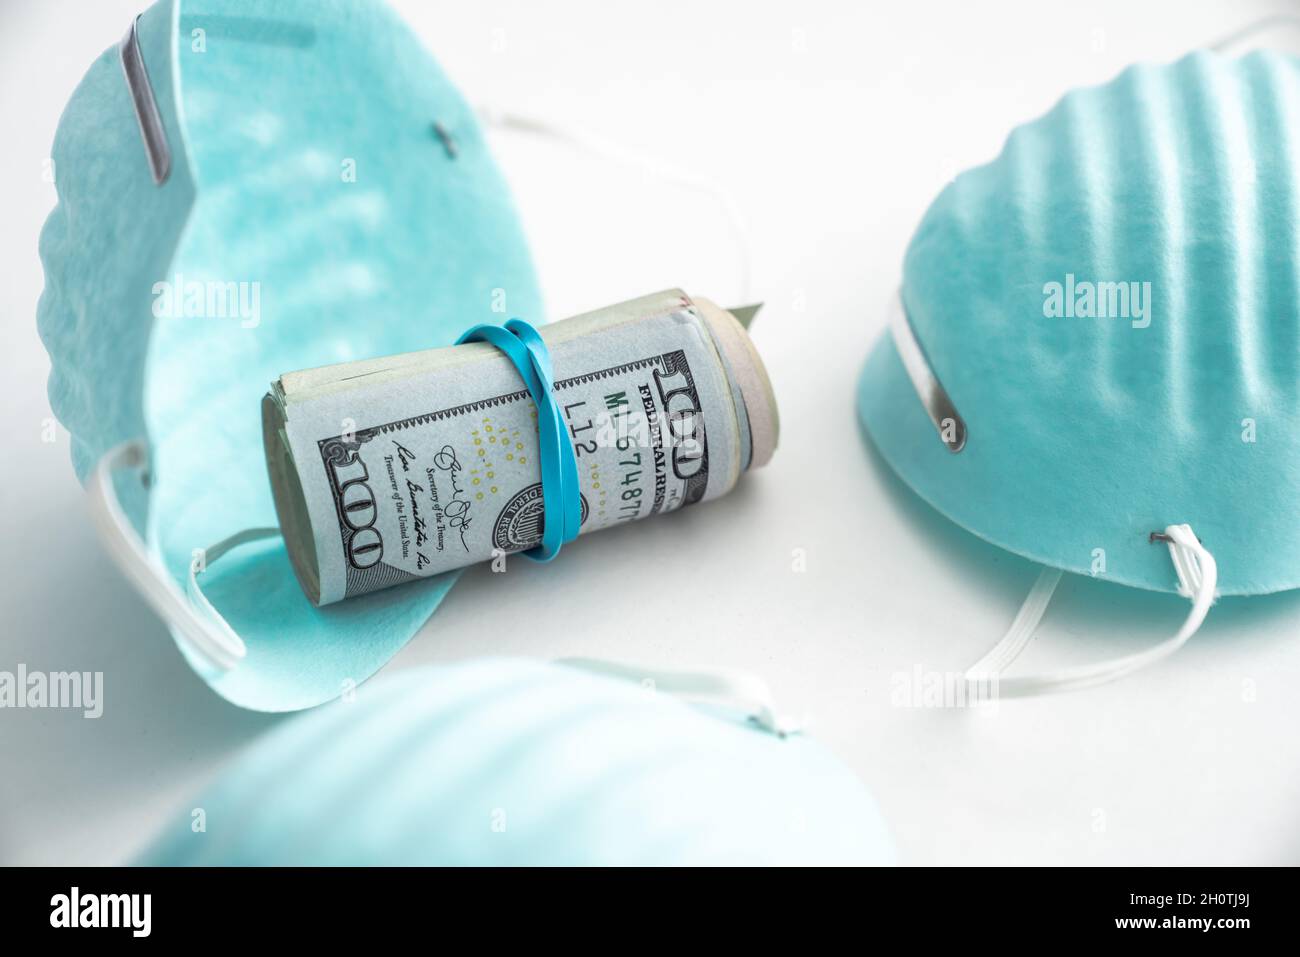 A rolled up wad of cash with a rubberband around it sits in a blue ribbed medical mask or protective face covering used for COVID-19 virus pandemic is Stock Photo